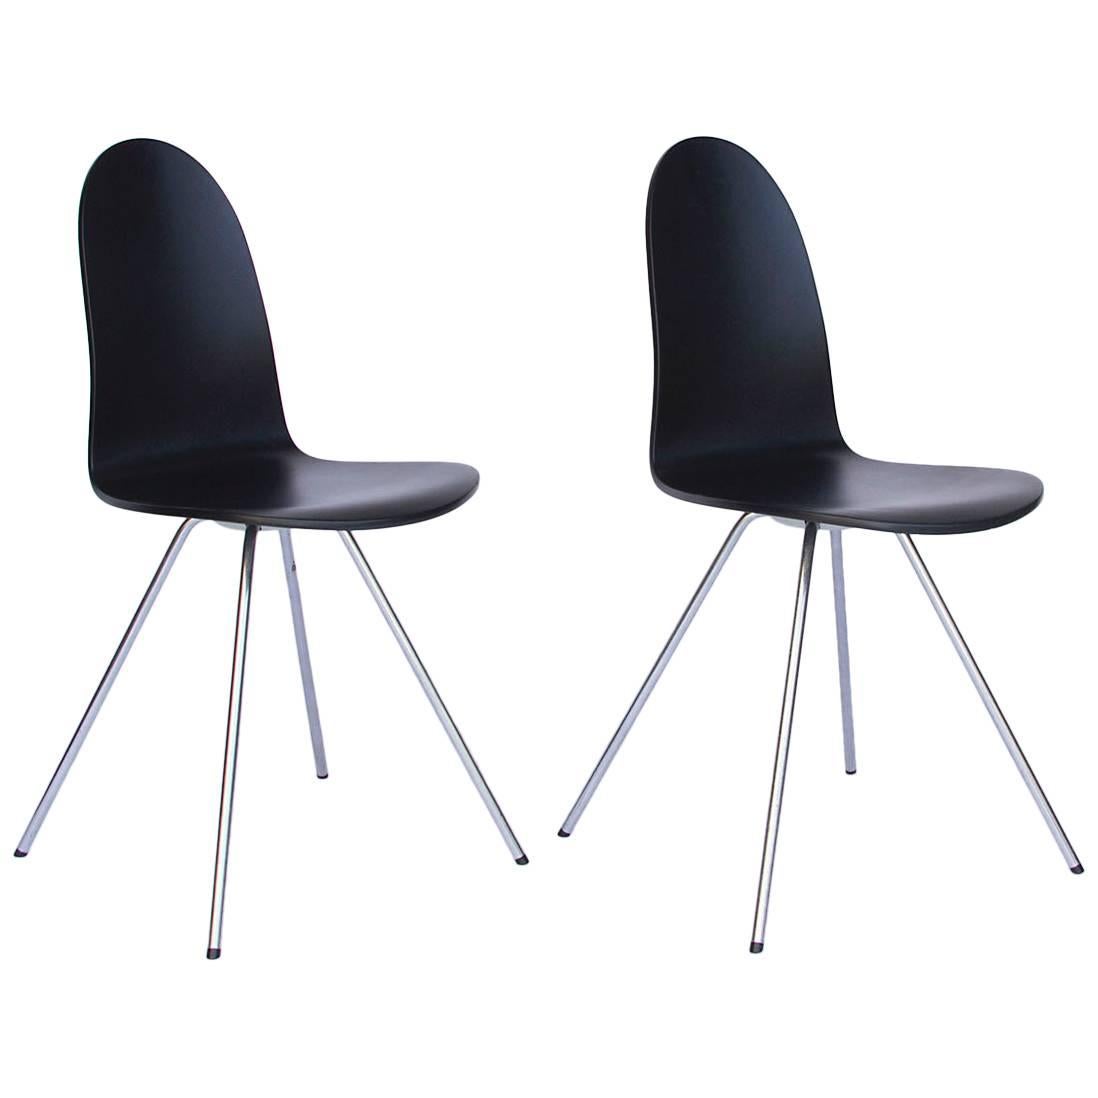 1955, Arne Jacobsen, Tongue Chair Black Lacquered